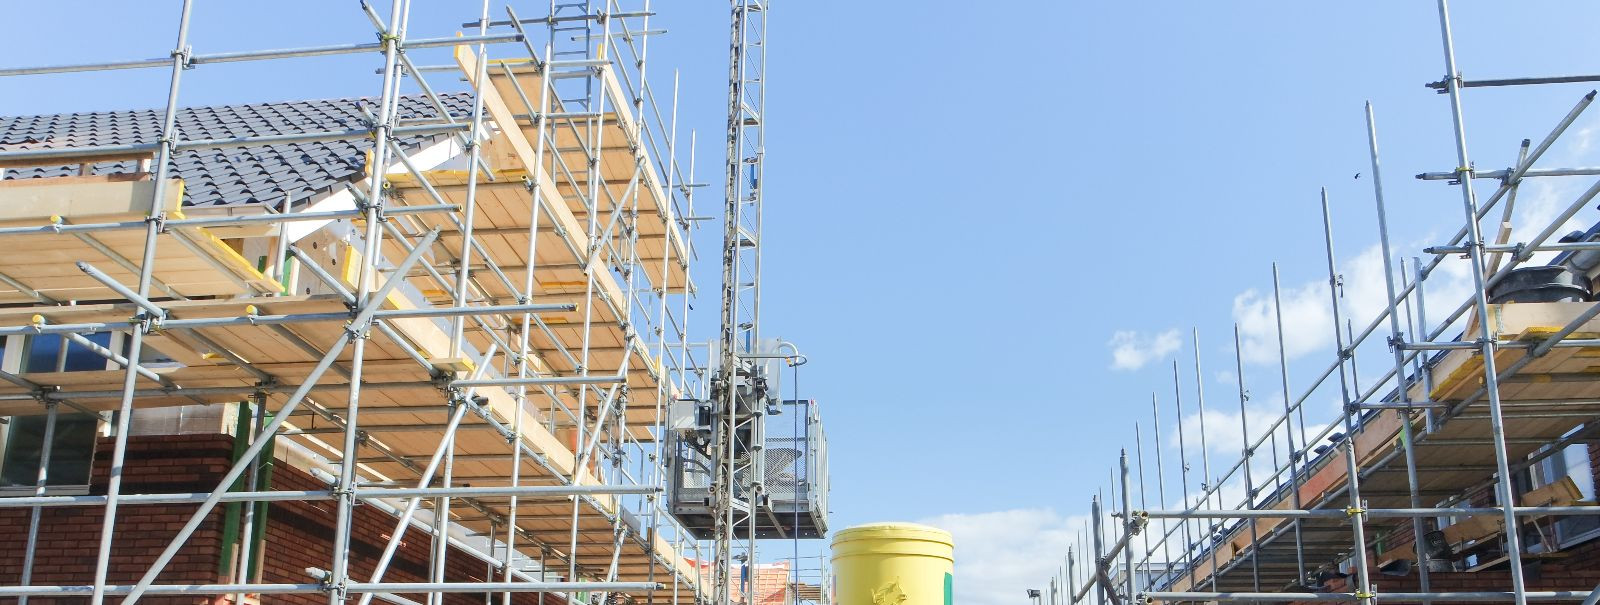 Scaffolding is a critical component in the construction industry, providing safe and stable work platforms for workers. The ability to transport scaffolding eff